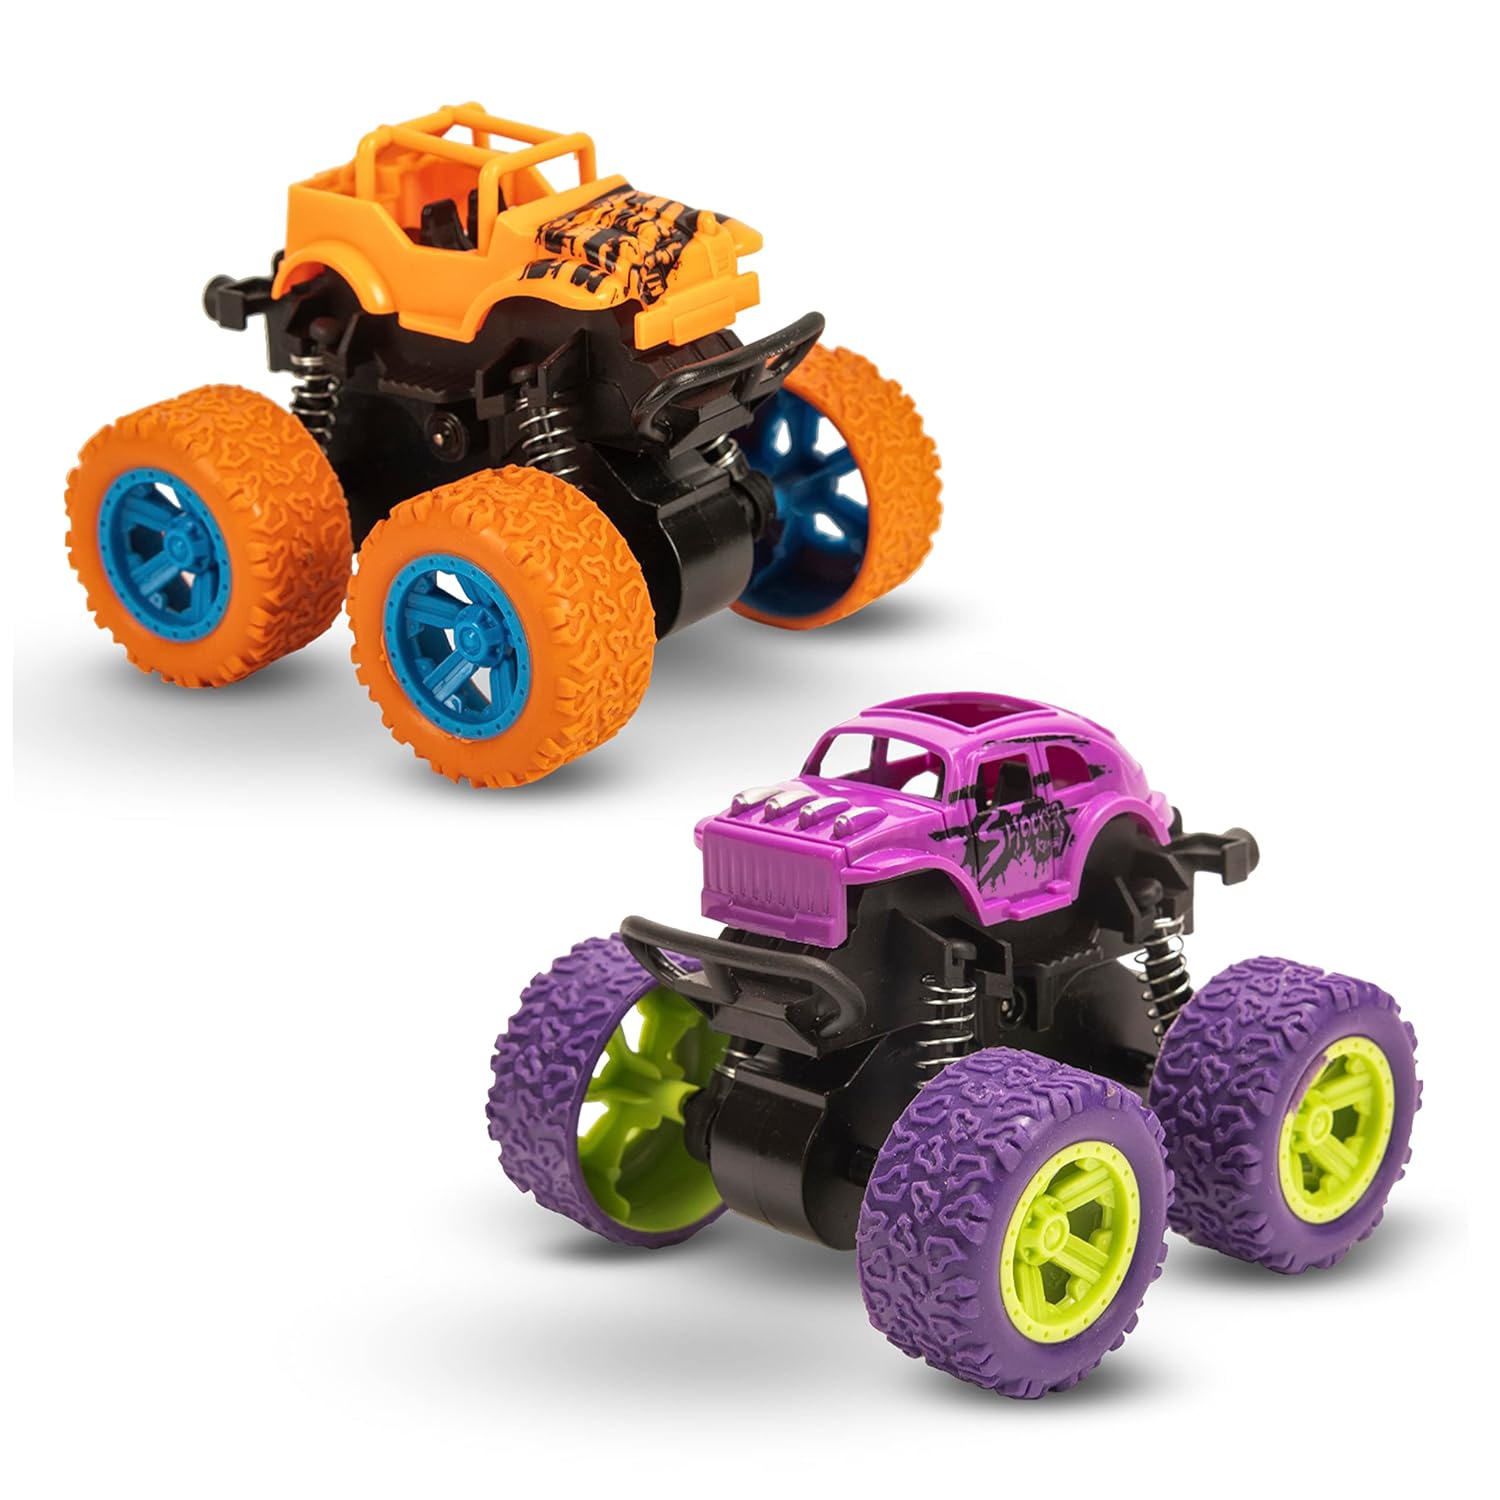 CTEEGC Toy savings up to 50% off Parent-child India